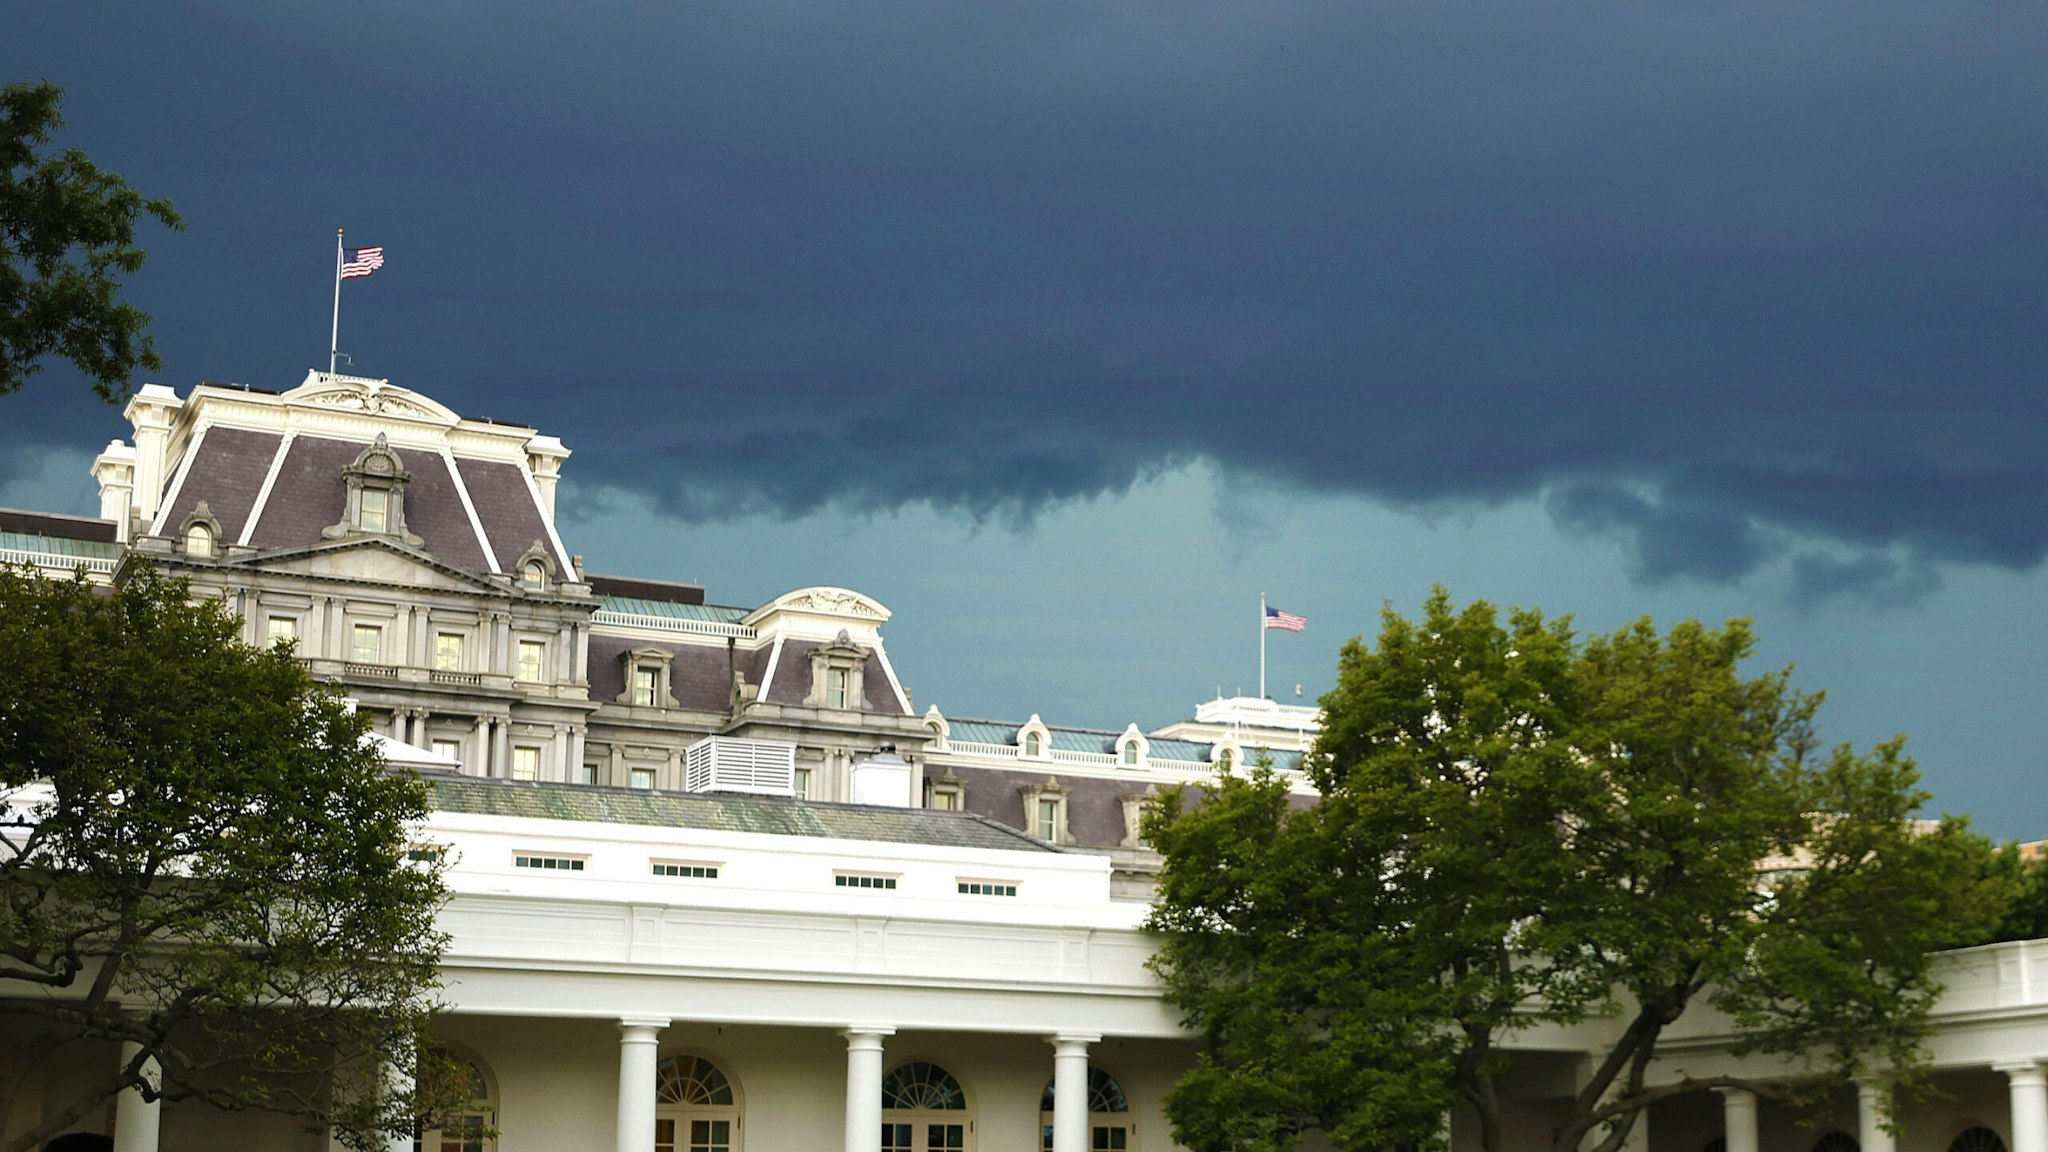 WASHINGTON, DC - JULY 12: Storm clouds roll in over the West Wing of the White House at the conclusion of the Congressional Picnic on July 12, 2022 in Washington, DC. An annual opportunity for members of Congress and their families to visit administration officials and others for non-partisan fellowship and entertainment, the picnic was cancelled in 2020 and 2021 due to the ongoing coronavirus pandemic.